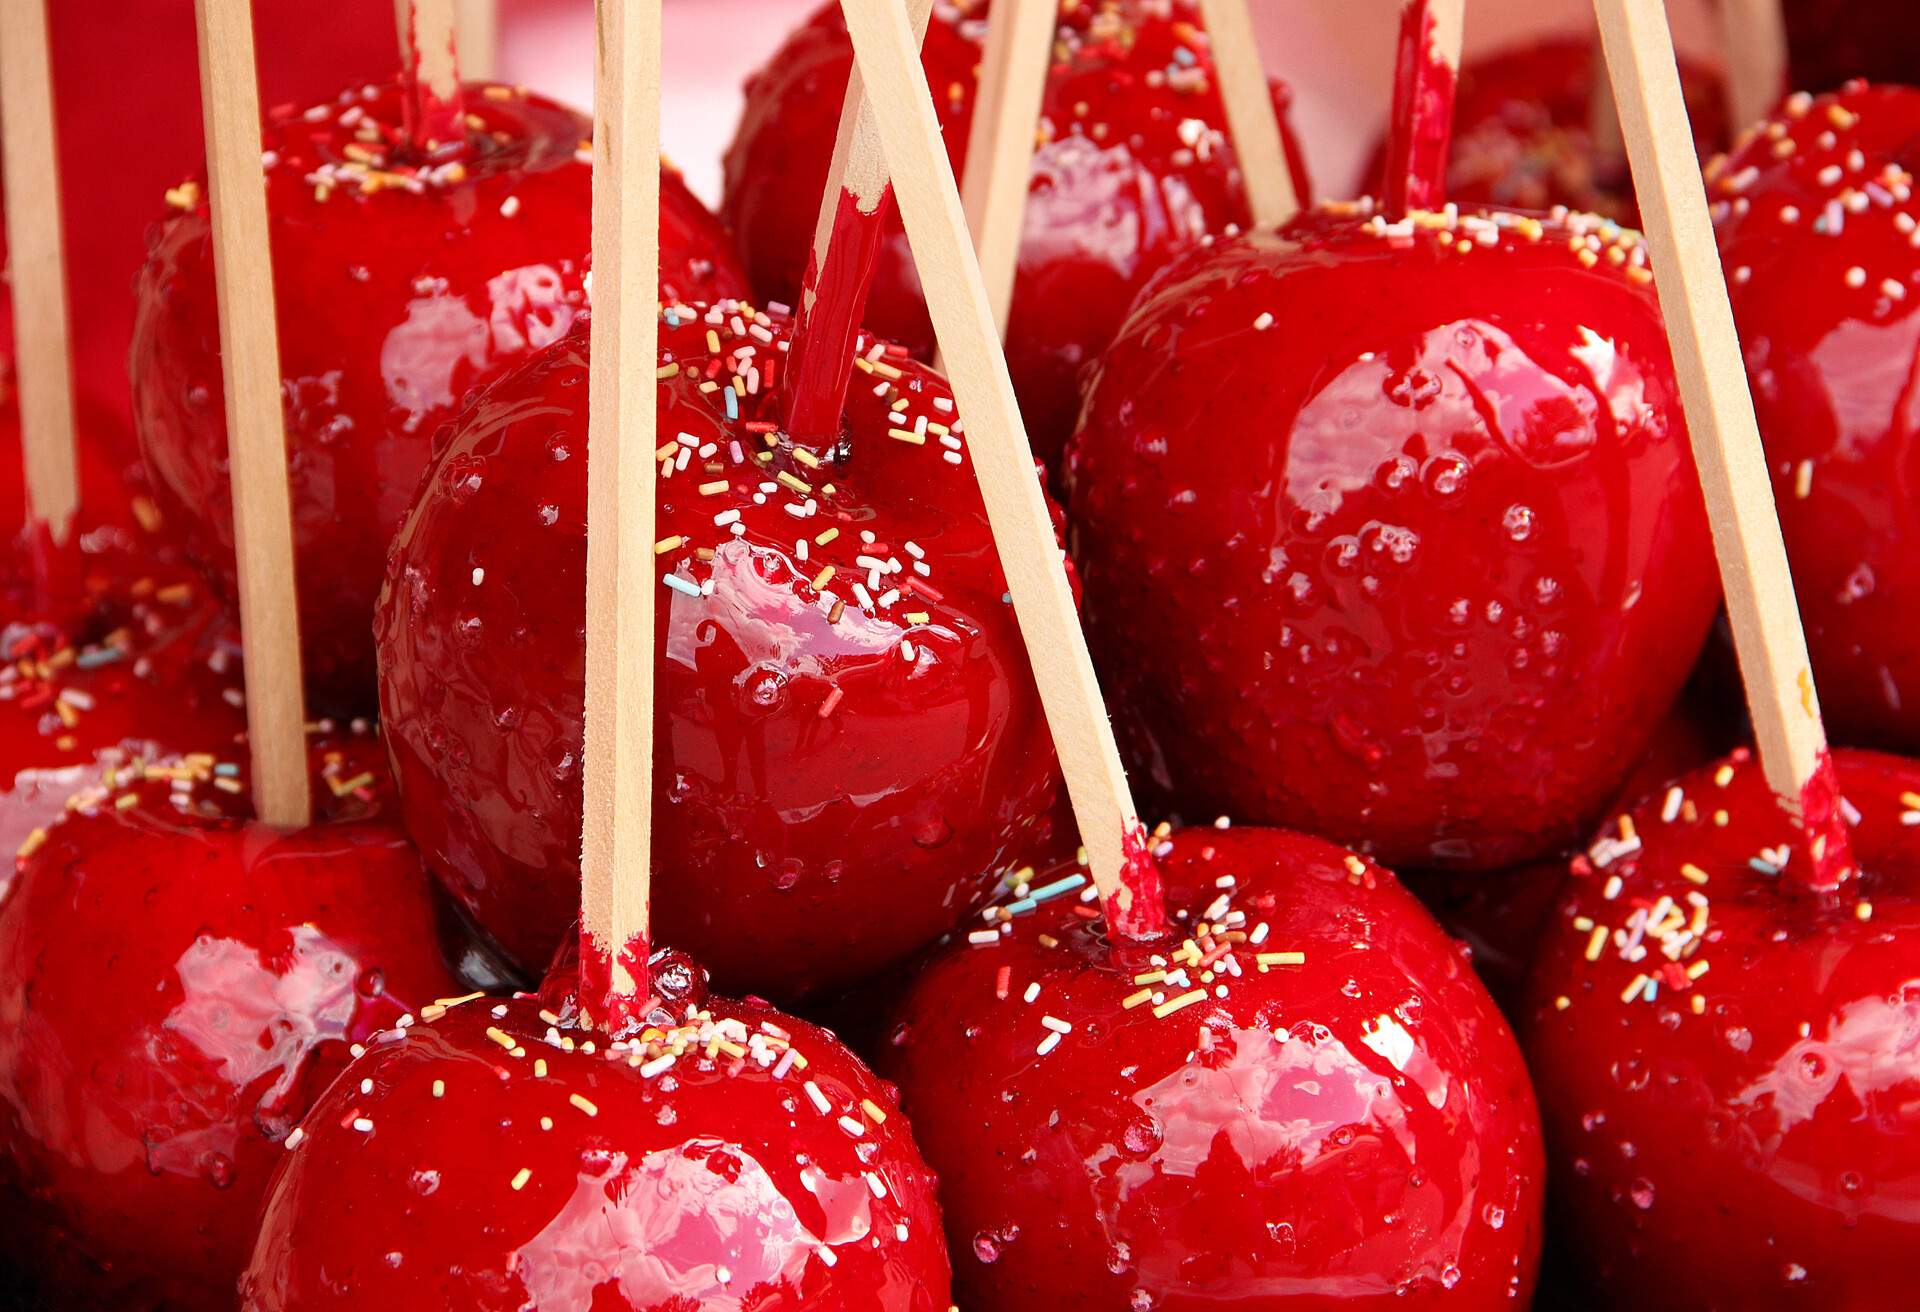 Sweet red candy apples covered with colorful sprinkles.